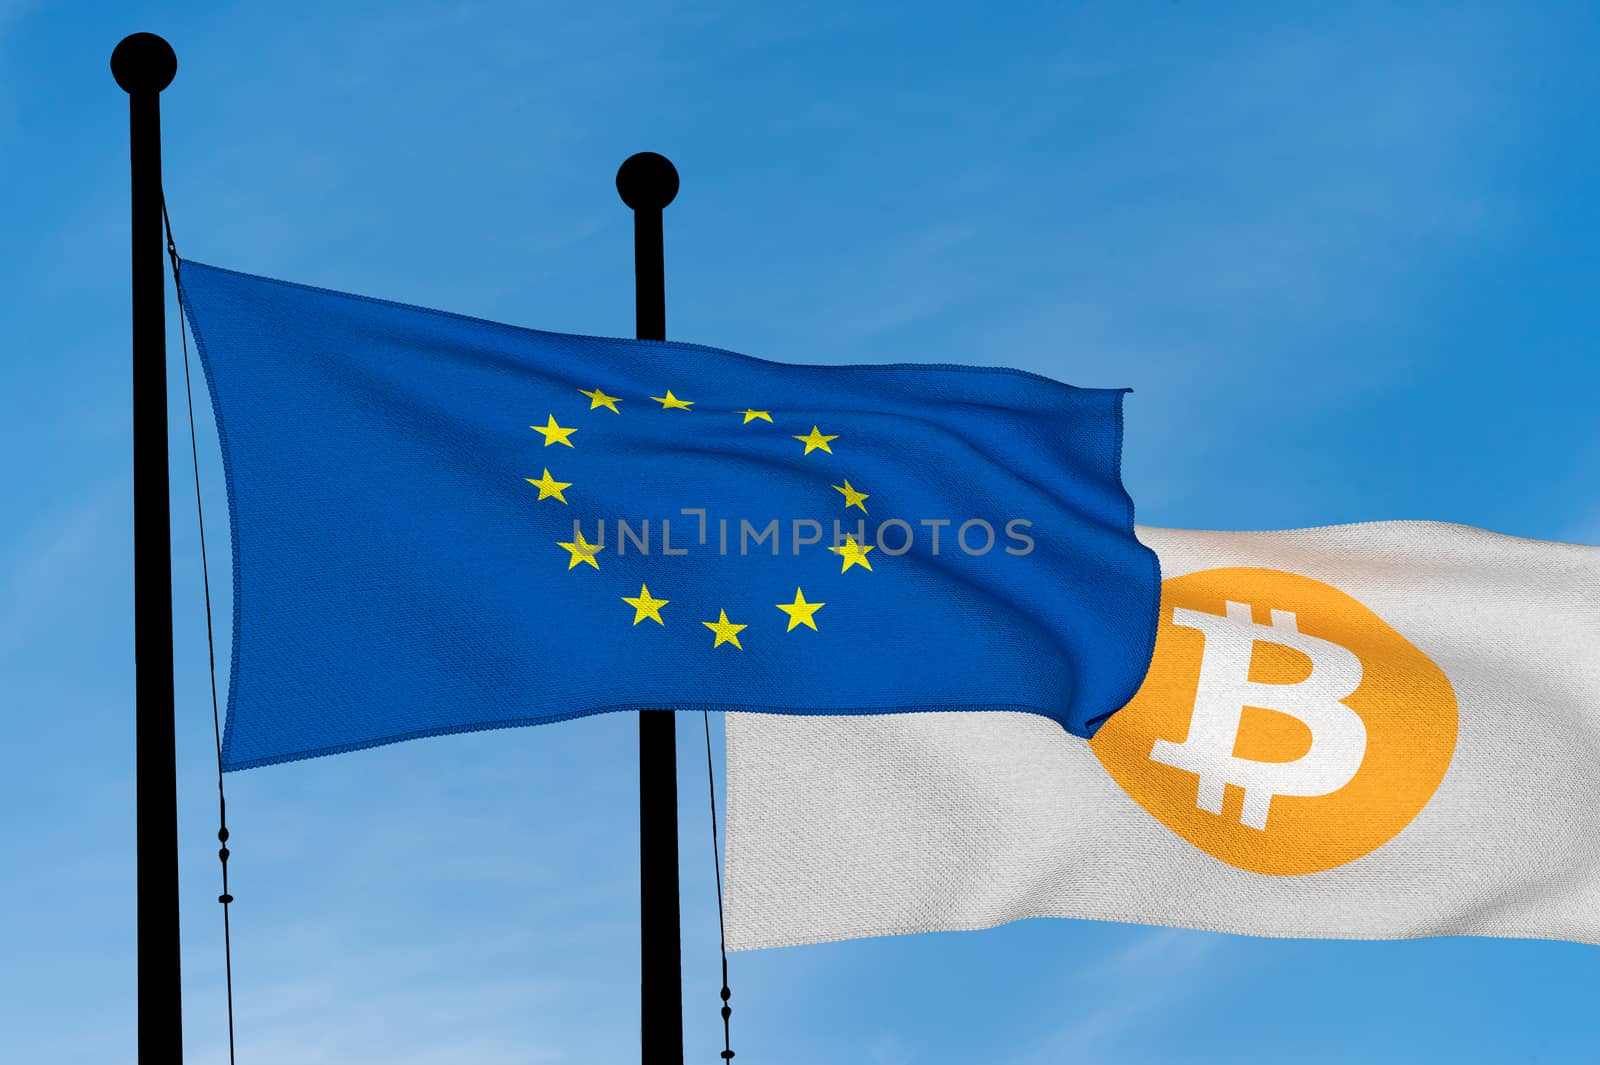 European flag and Bitcoin Flag waving over blue sky (digitally generated image)